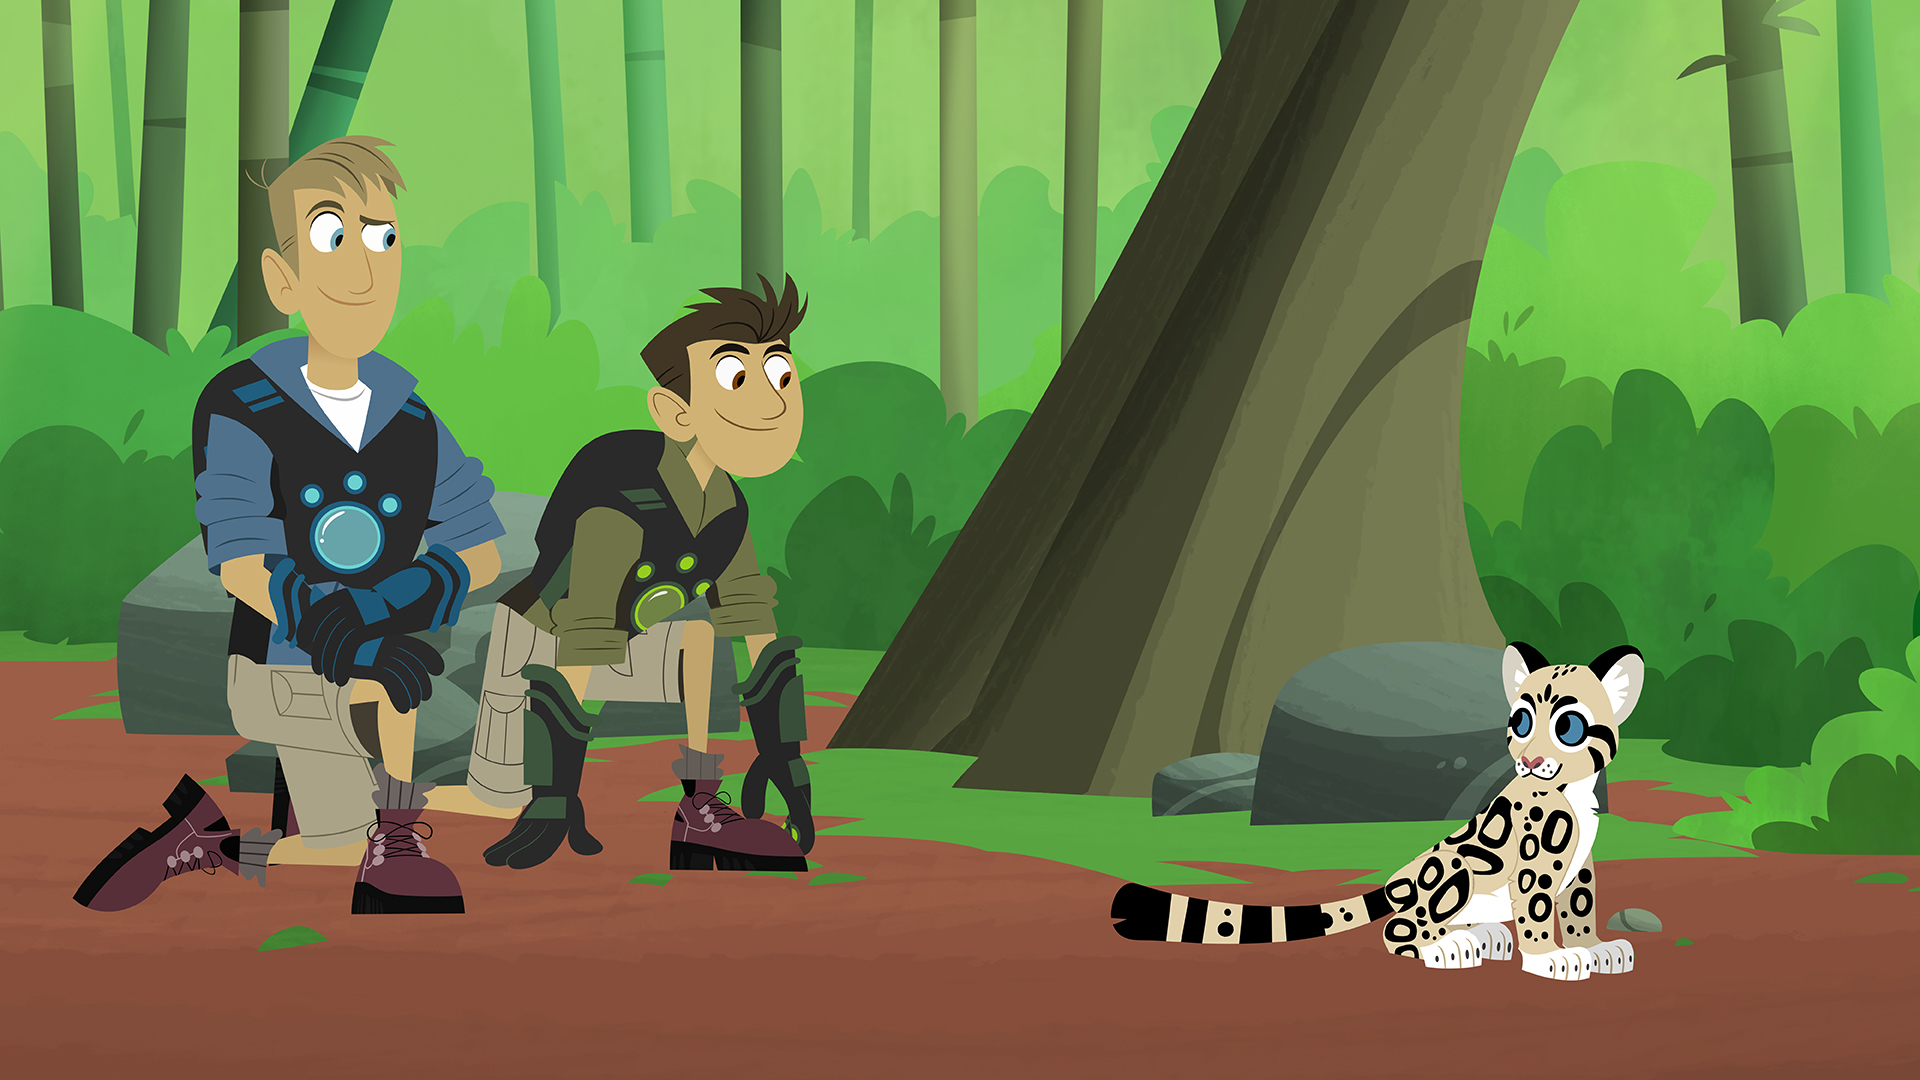 A new adventure awaits the Kratt Bros, in "Wild Kratts: Cats and Dogs."